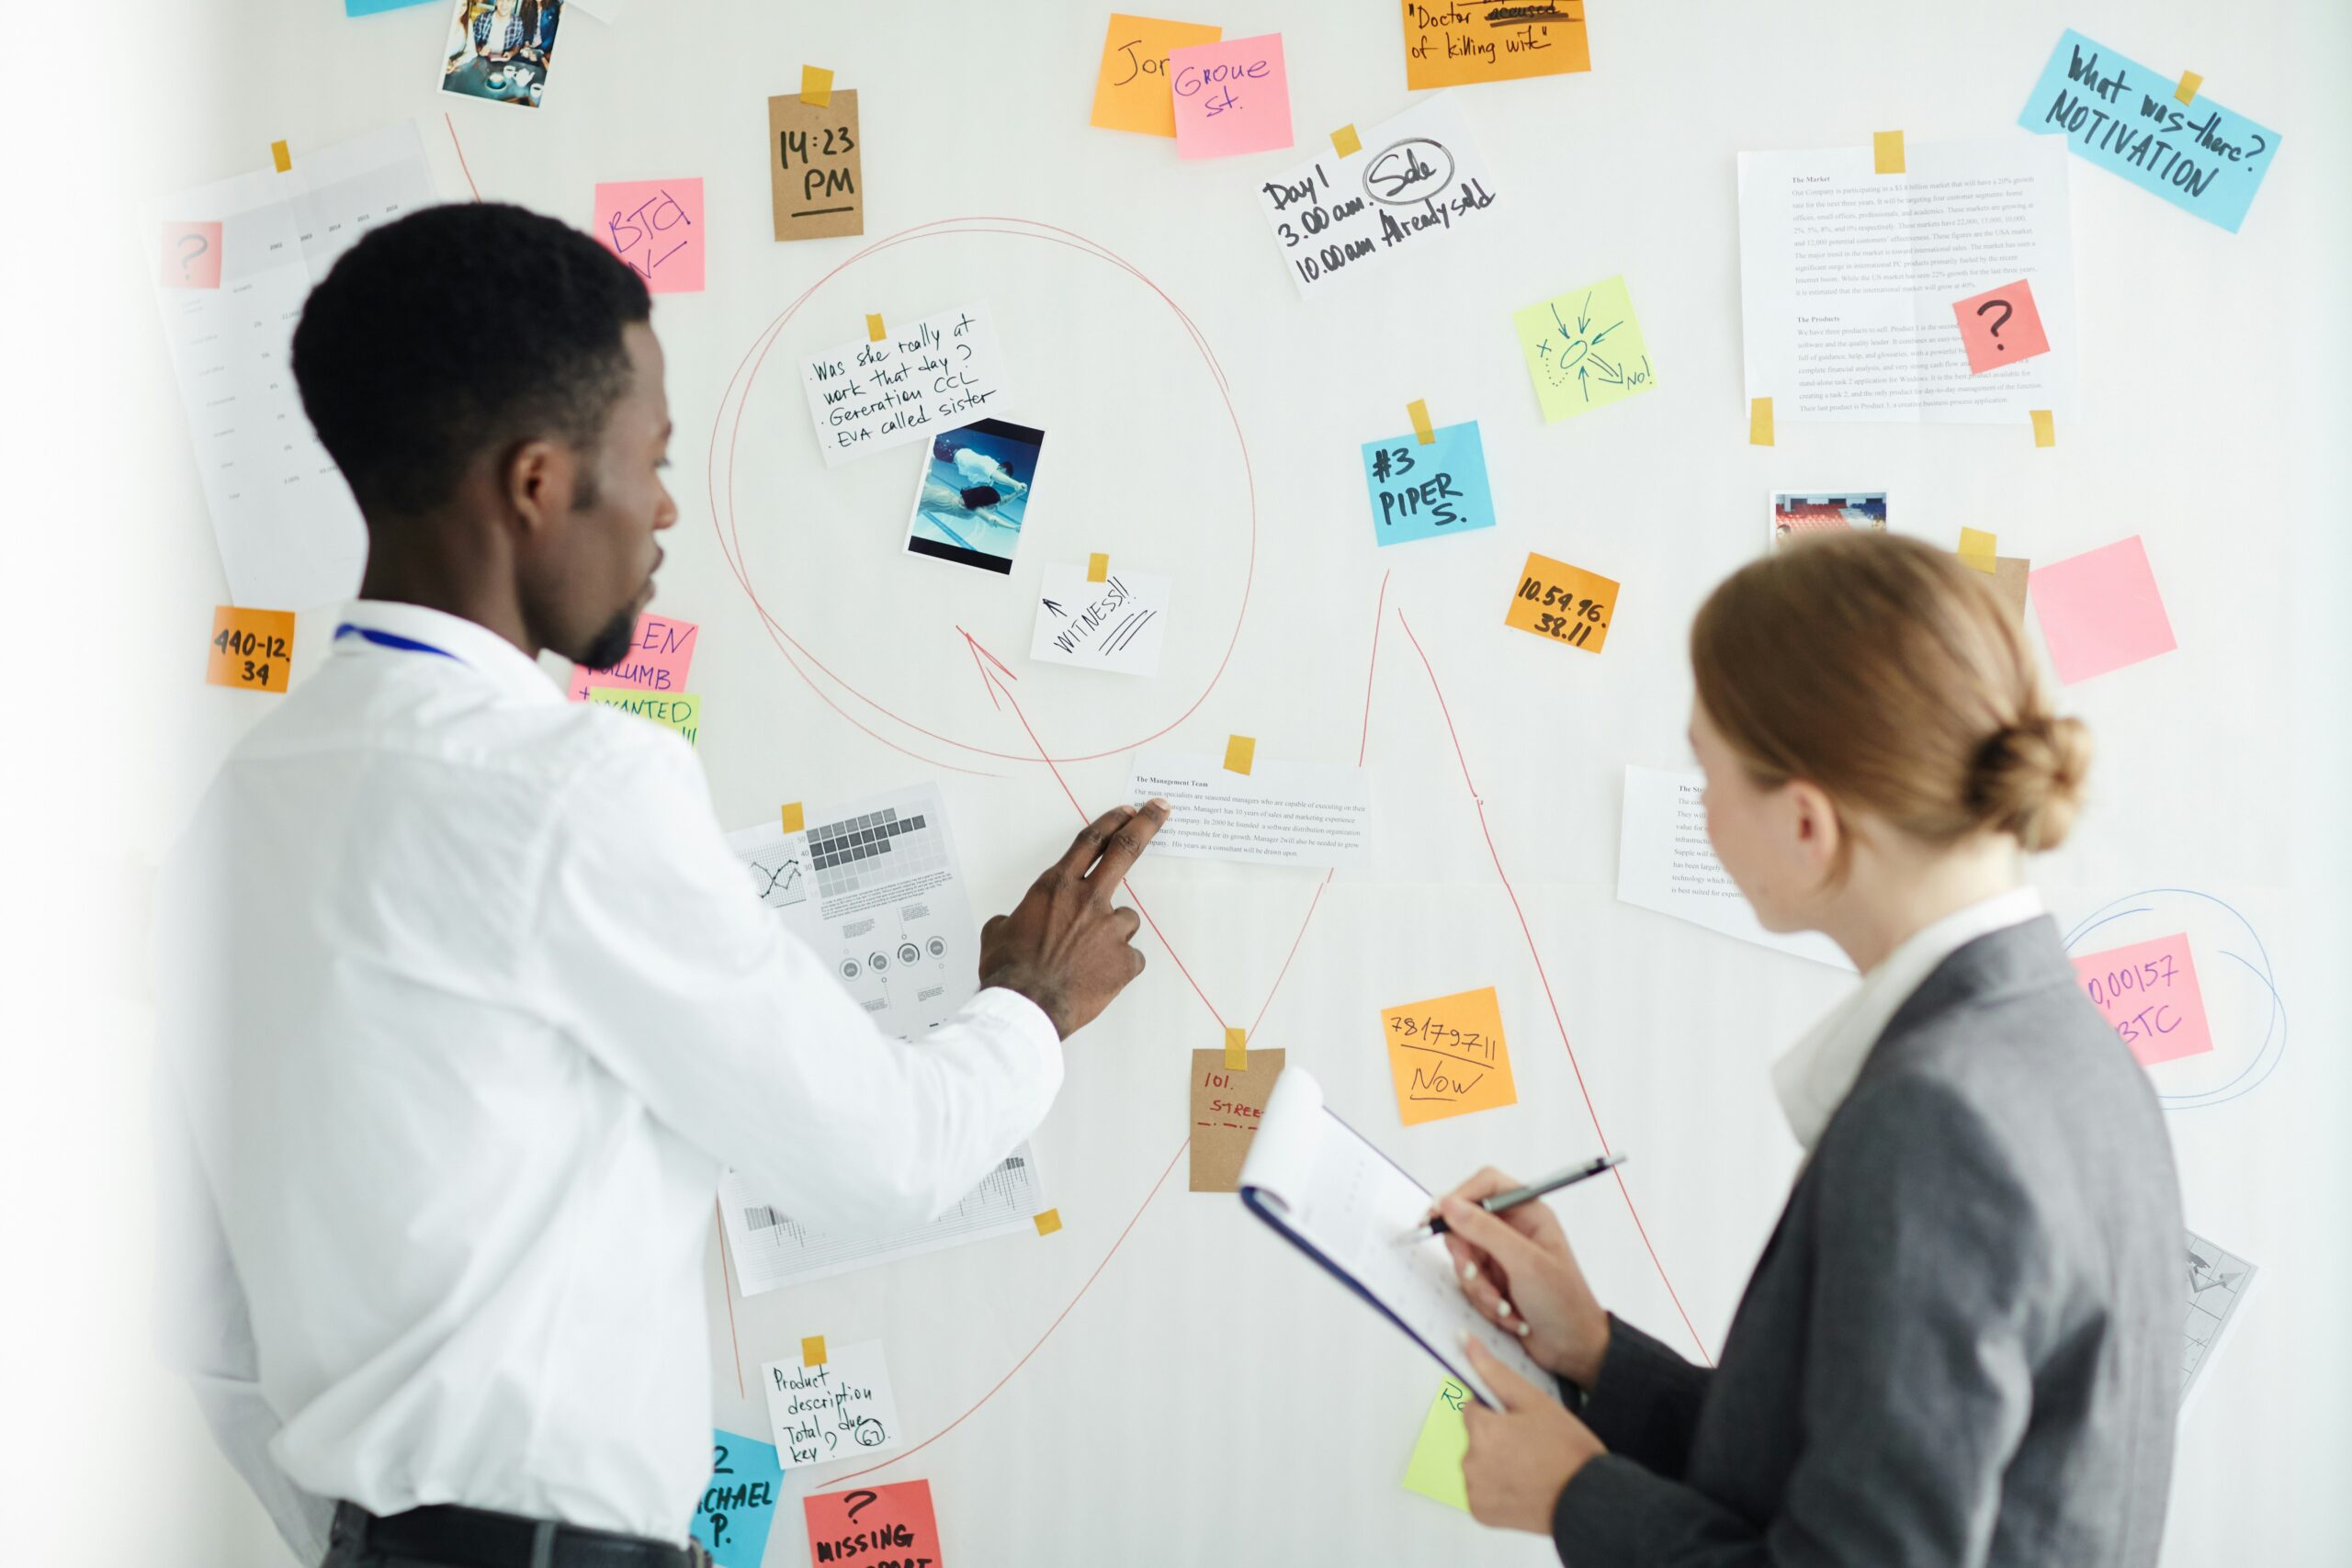 Two people in formal attire discuss data and charts on a whiteboard covered with sticky notes and paper thinking that workflow automation would help them.